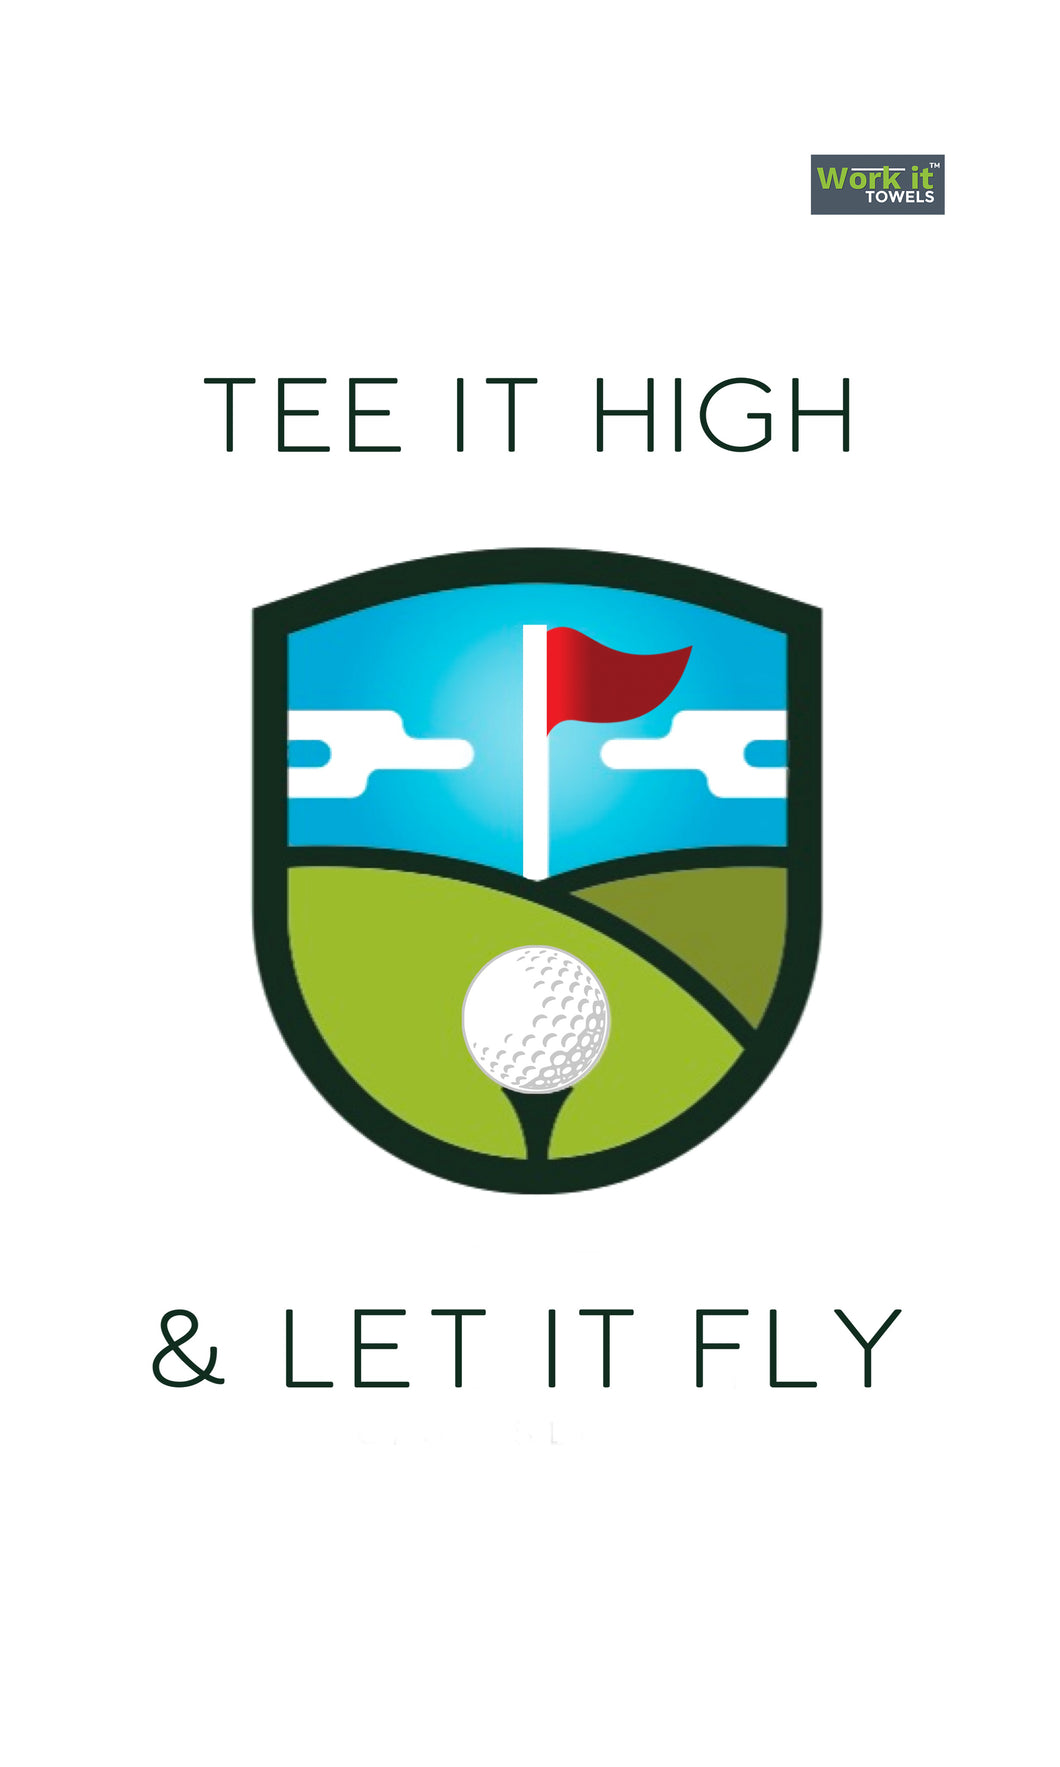 Tee it high, and let it fly! - work it towels